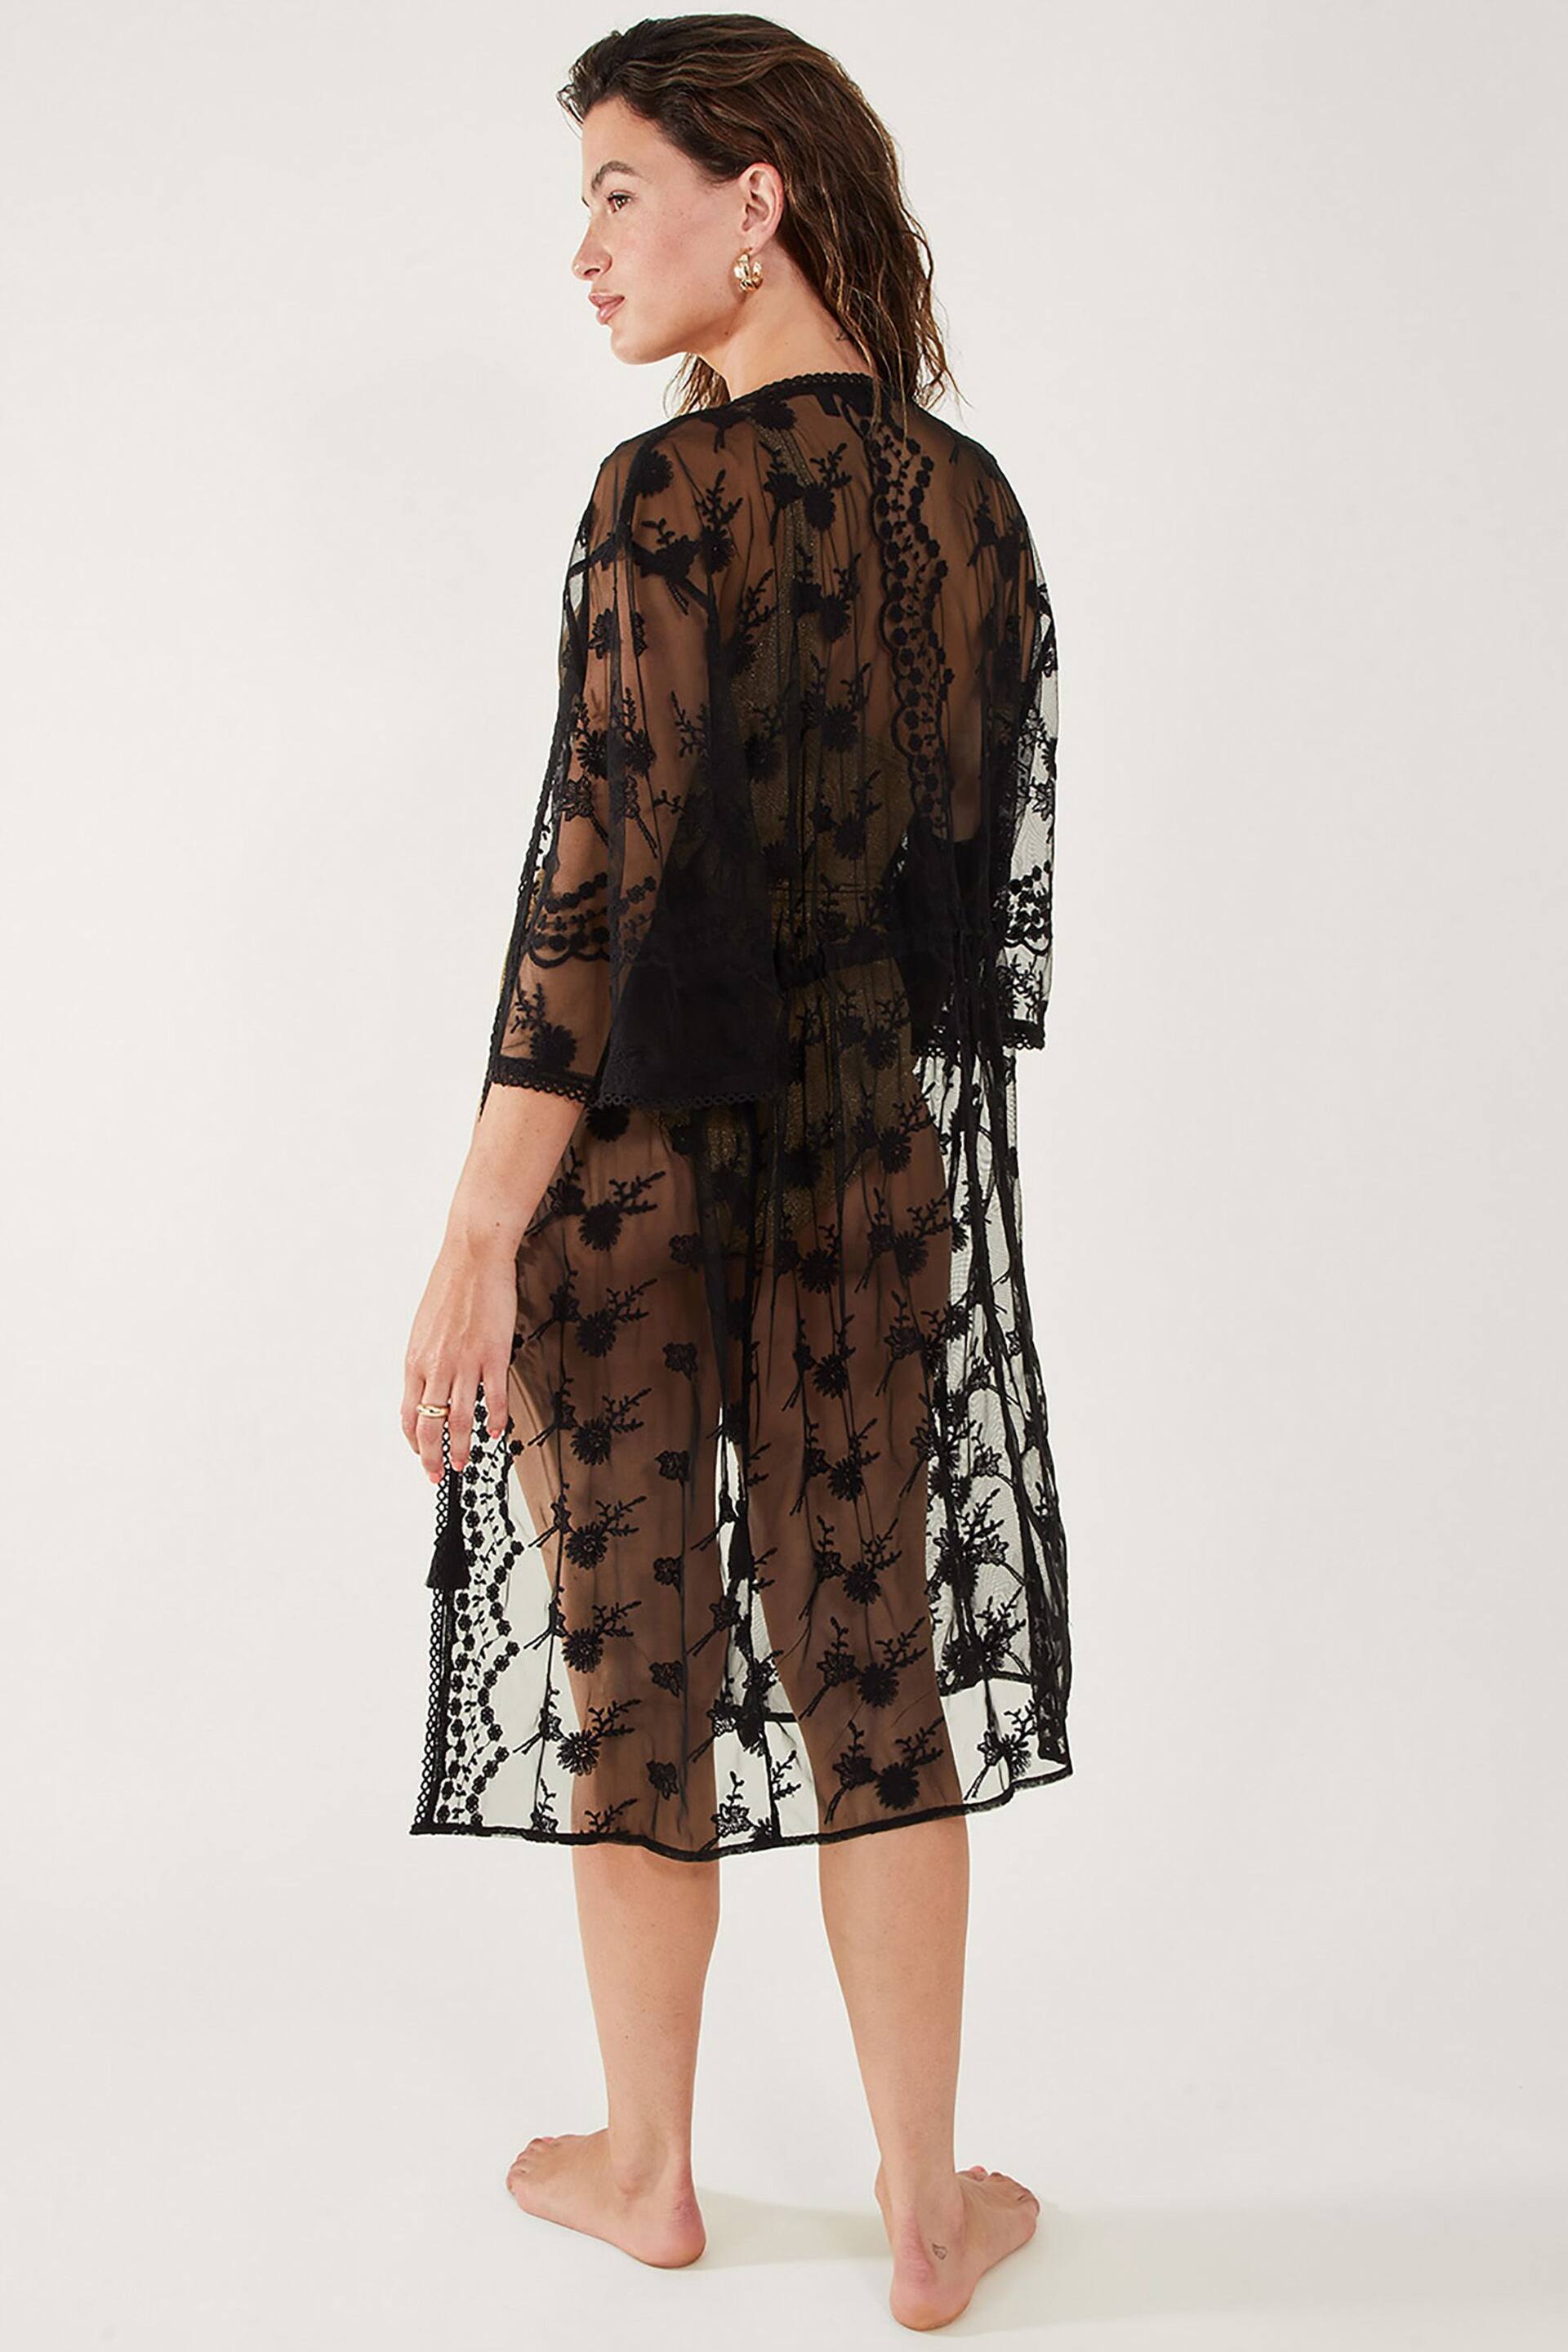 Accessorize Black Lace Cover-Up - Image 2 of 4